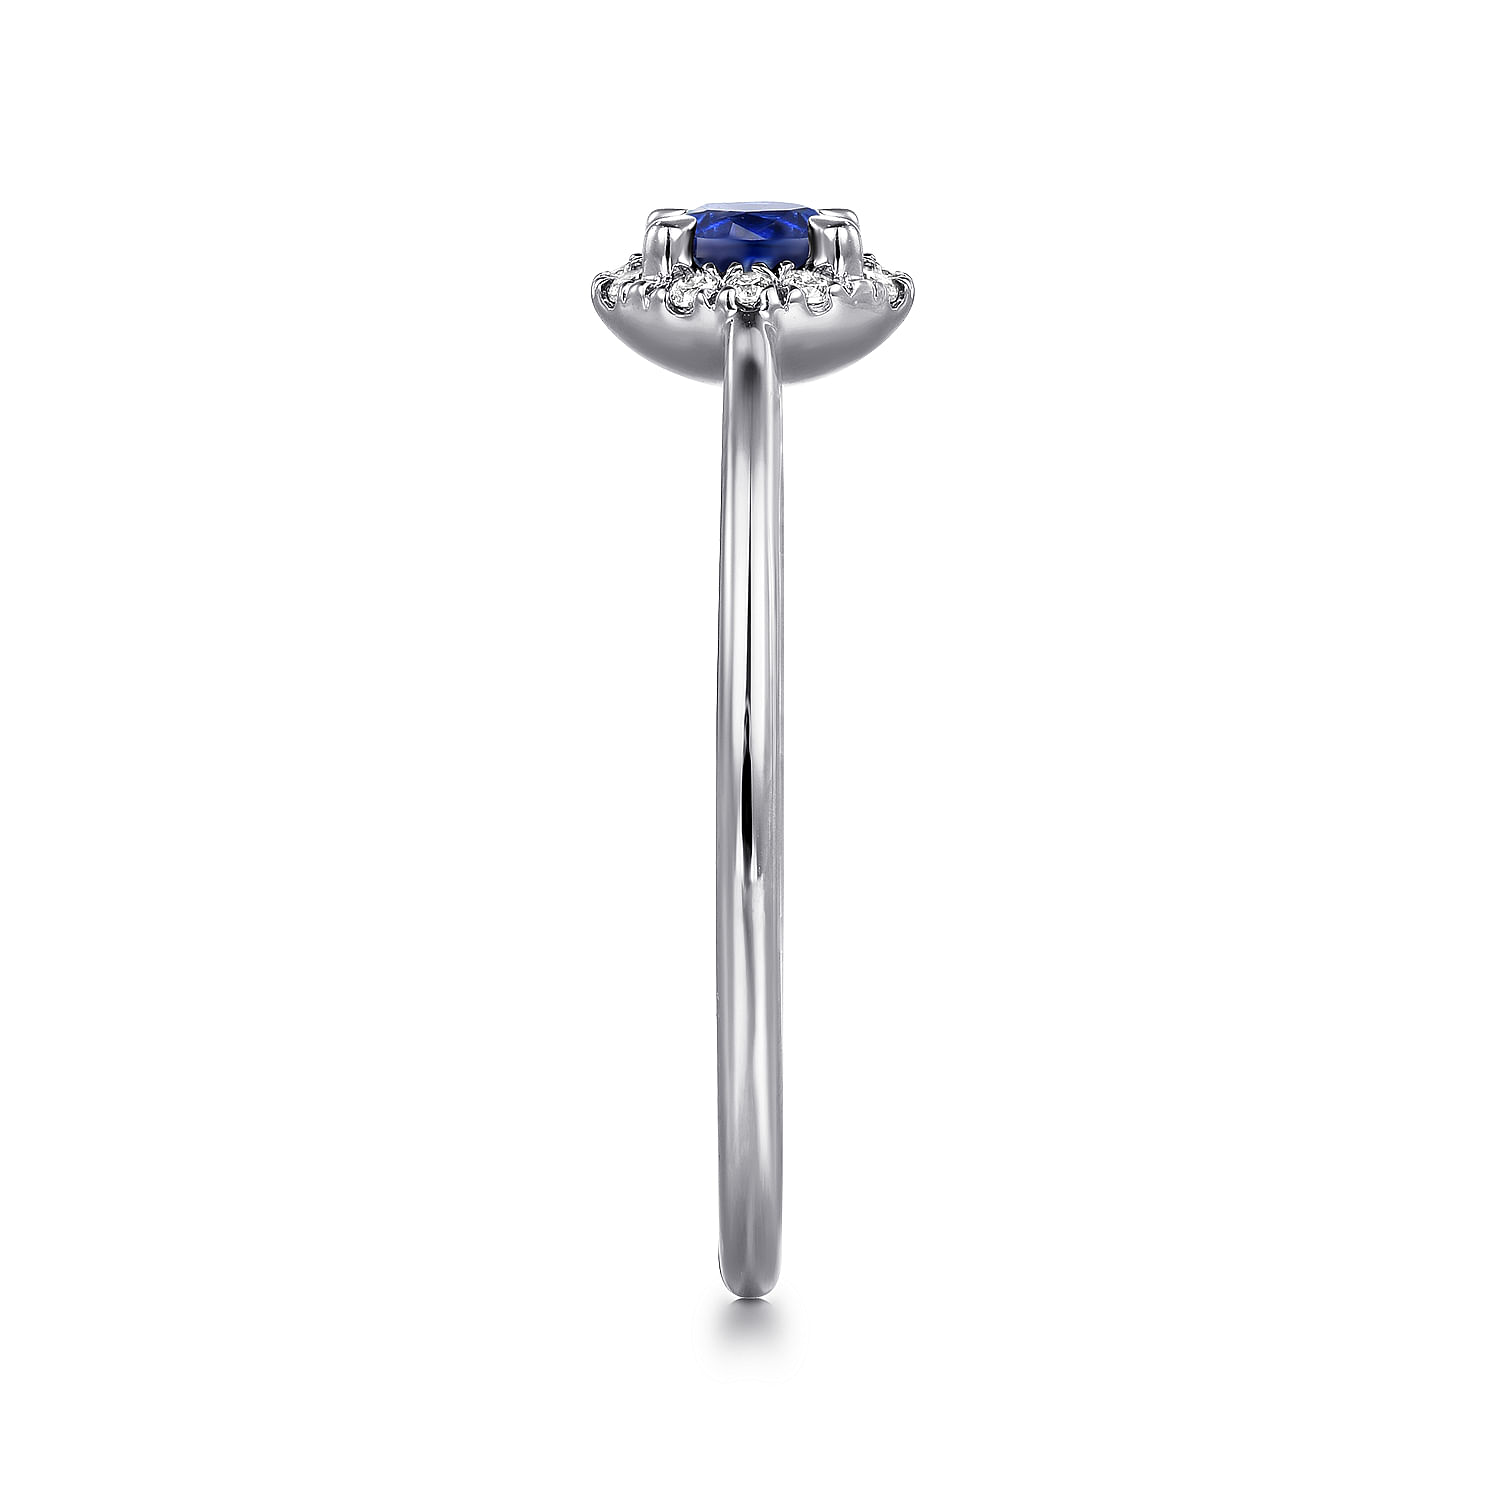 14K White Gold Blue Sapphire and Diamond Halo Promise Ring